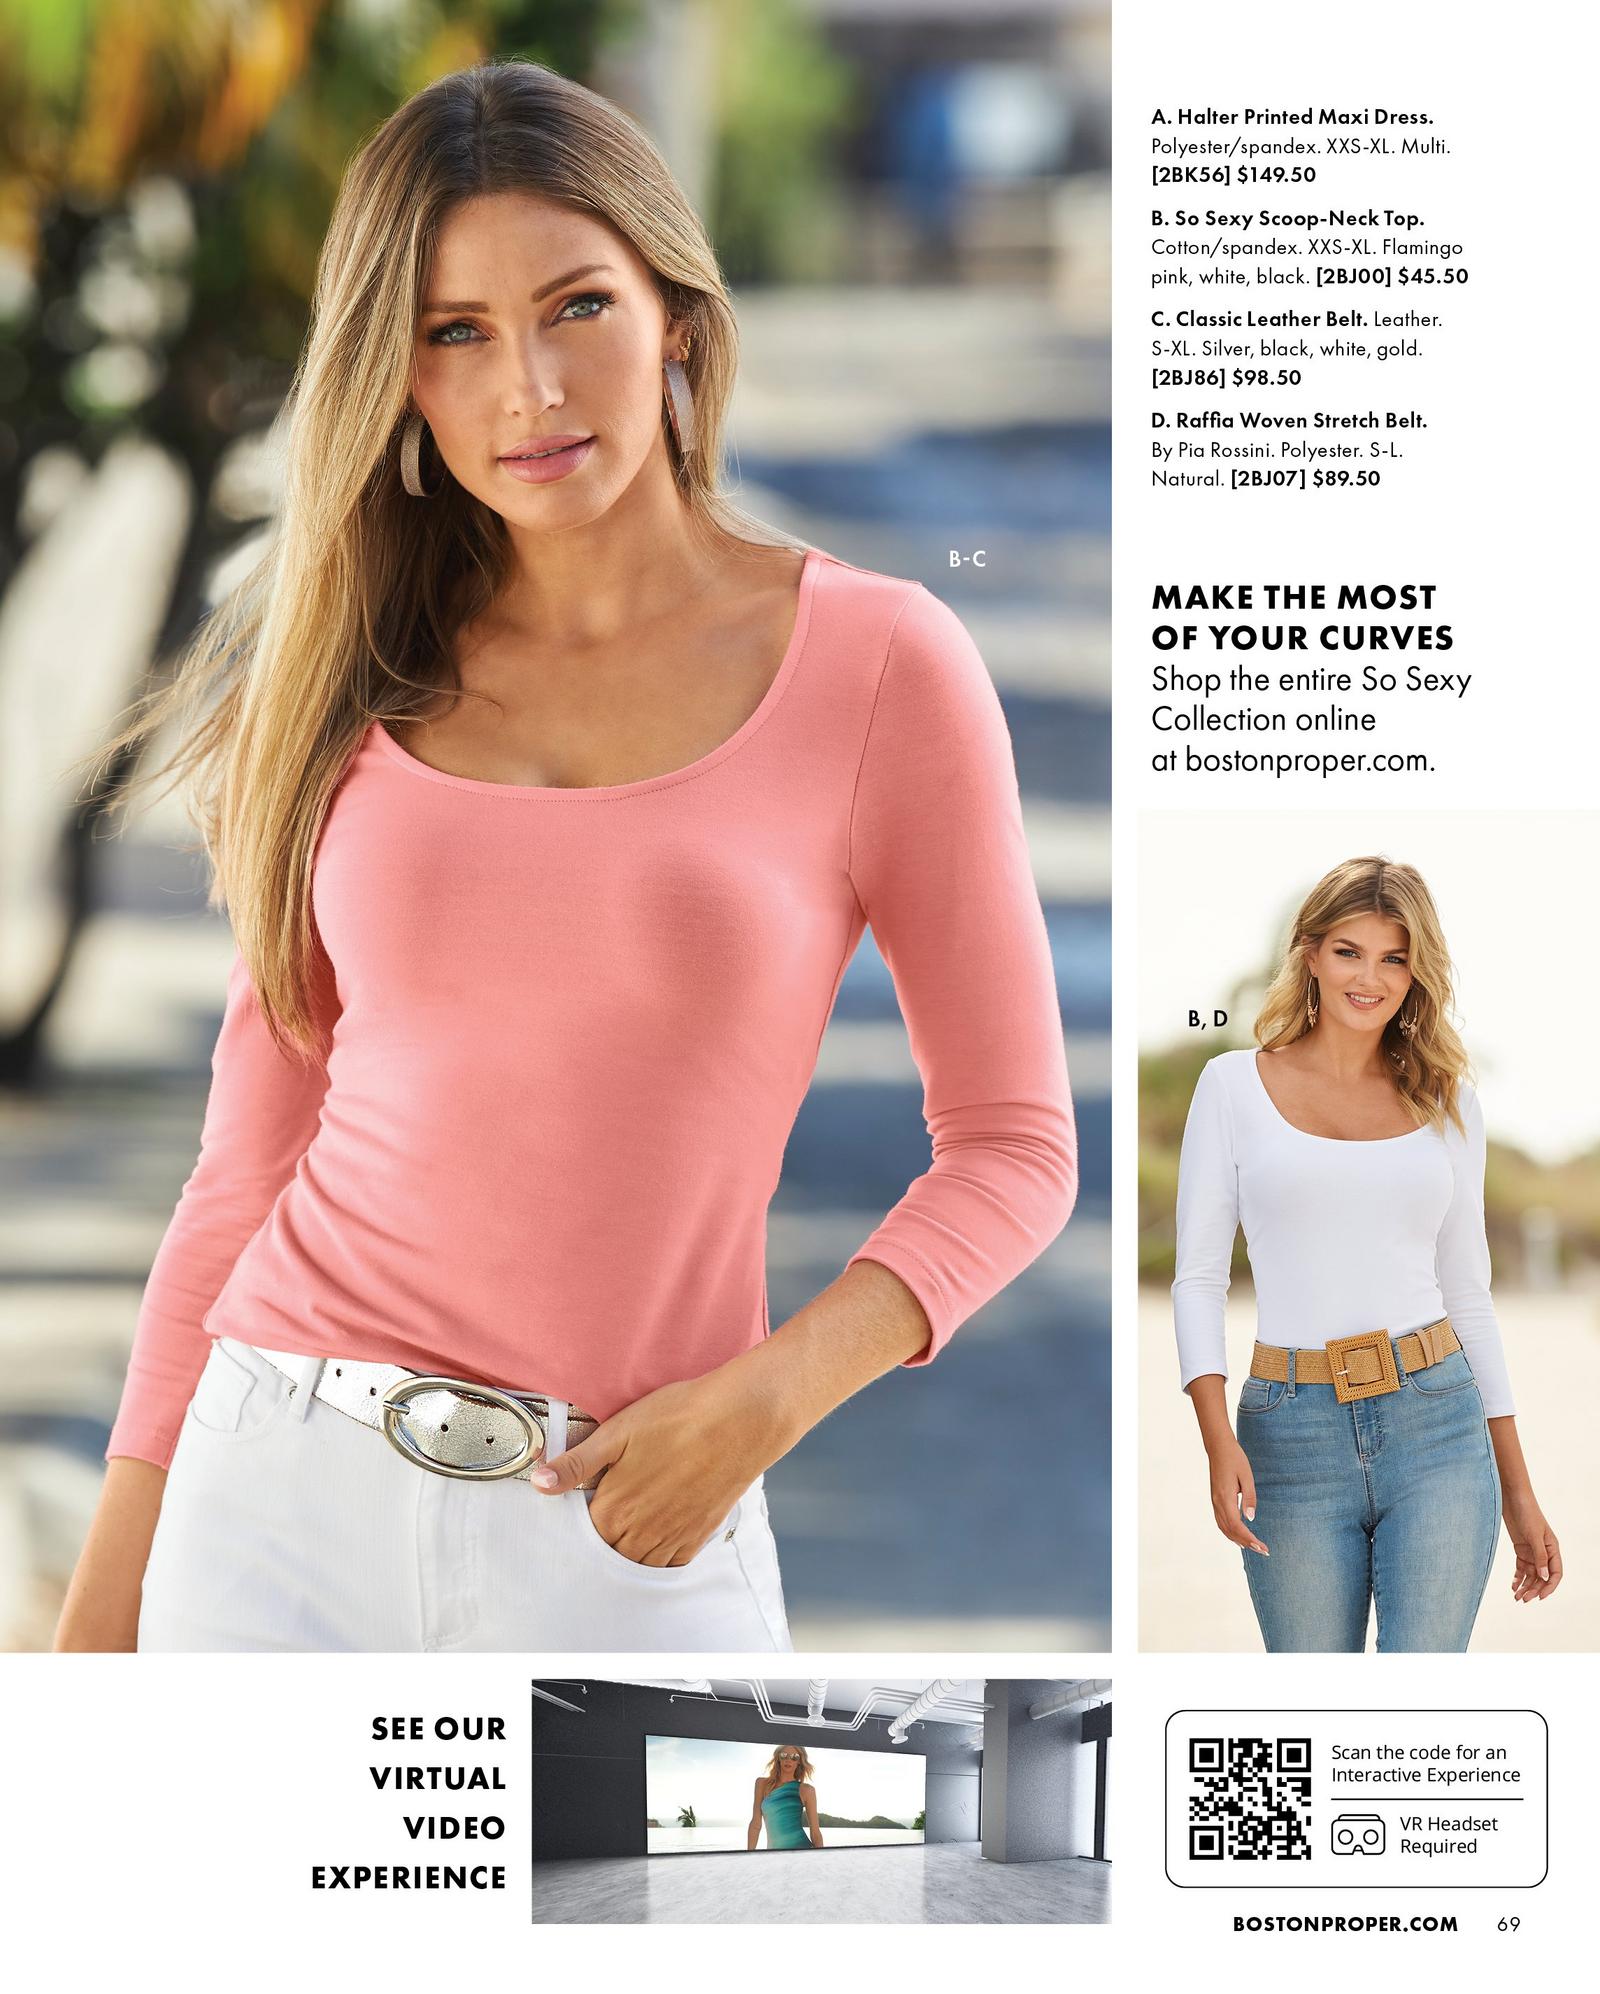 left model wearing a pink scoop neck three quarter sleeve top, silver belt, and white jeans. right model wearing a white scoop-neck three-quarter sleeve top, raffia belt, and light wash jeans.